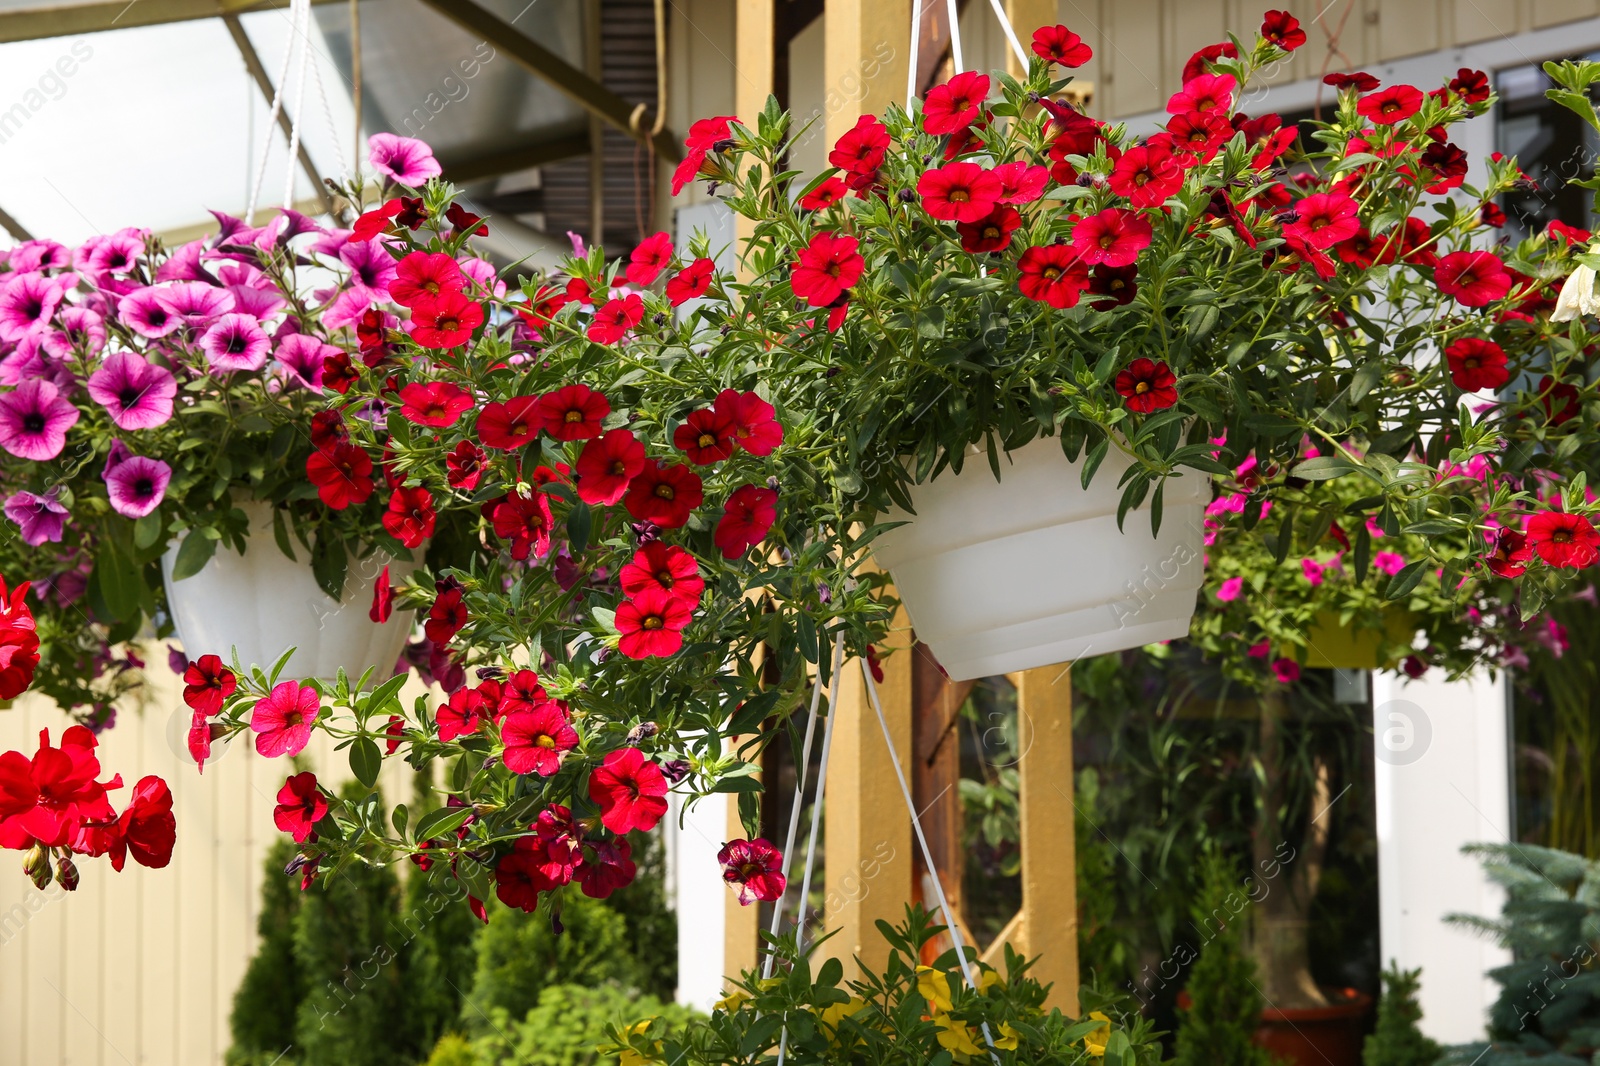 Photo of Different beautiful flowers in plant pots hanging outdoors